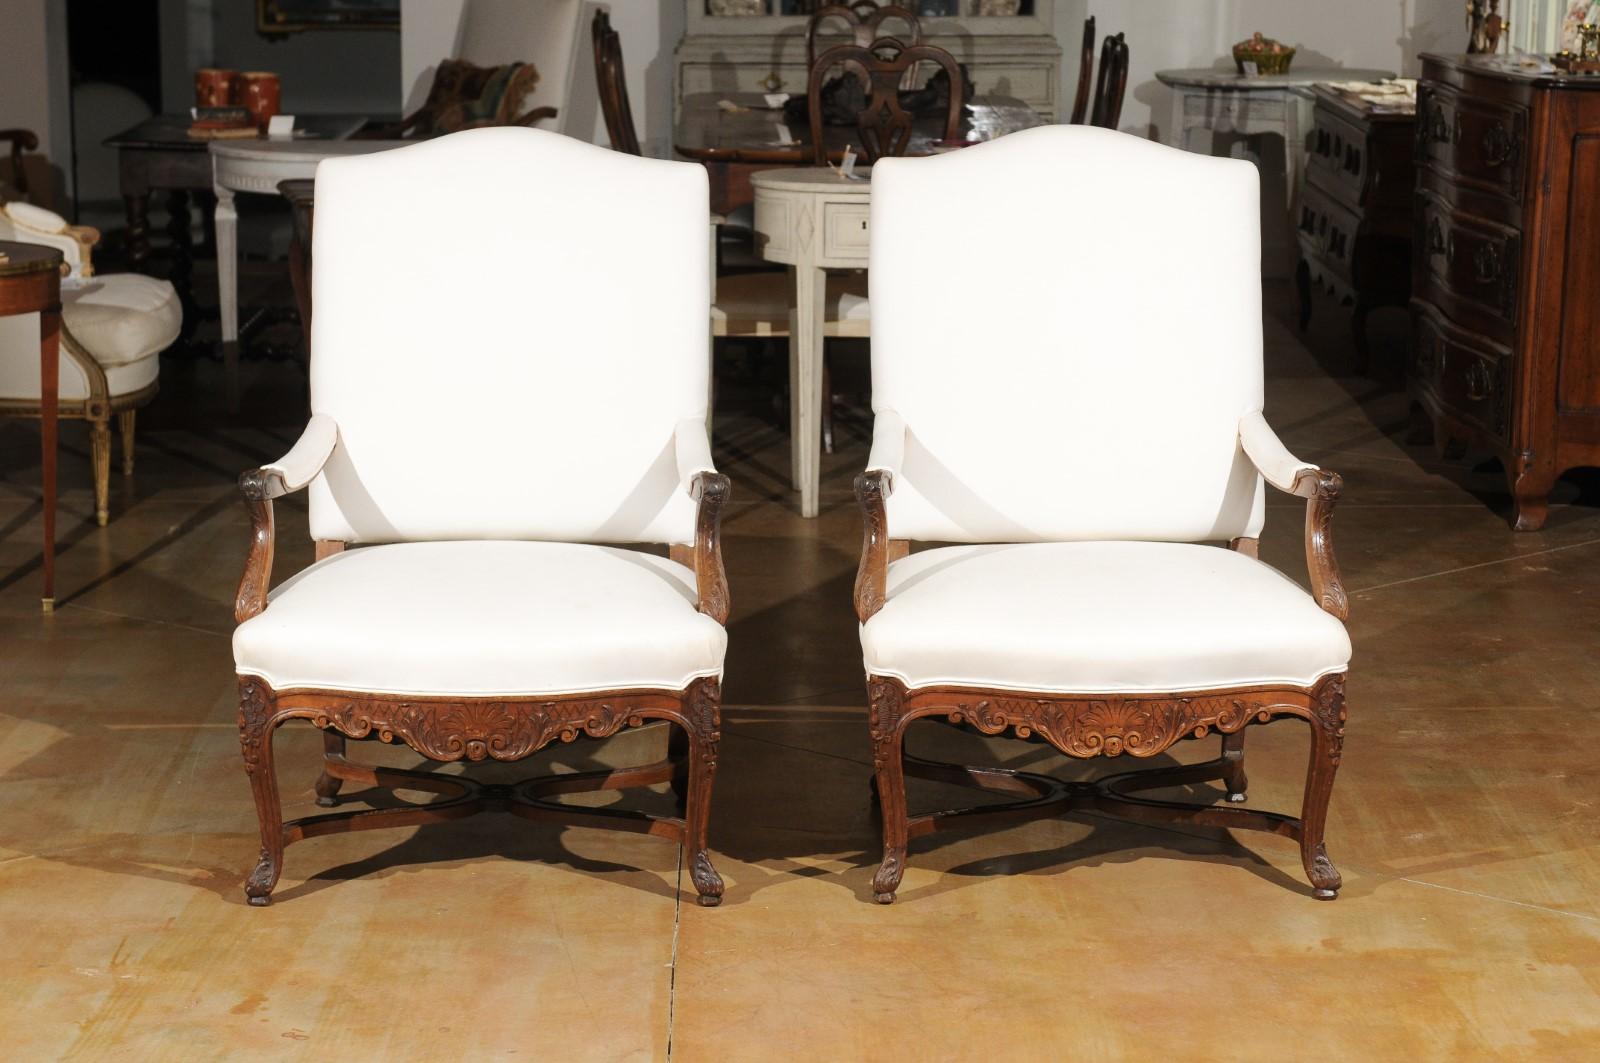 Upholstery Pair of French Régence Style 19th Century Walnut Armchairs with Carved Foliage